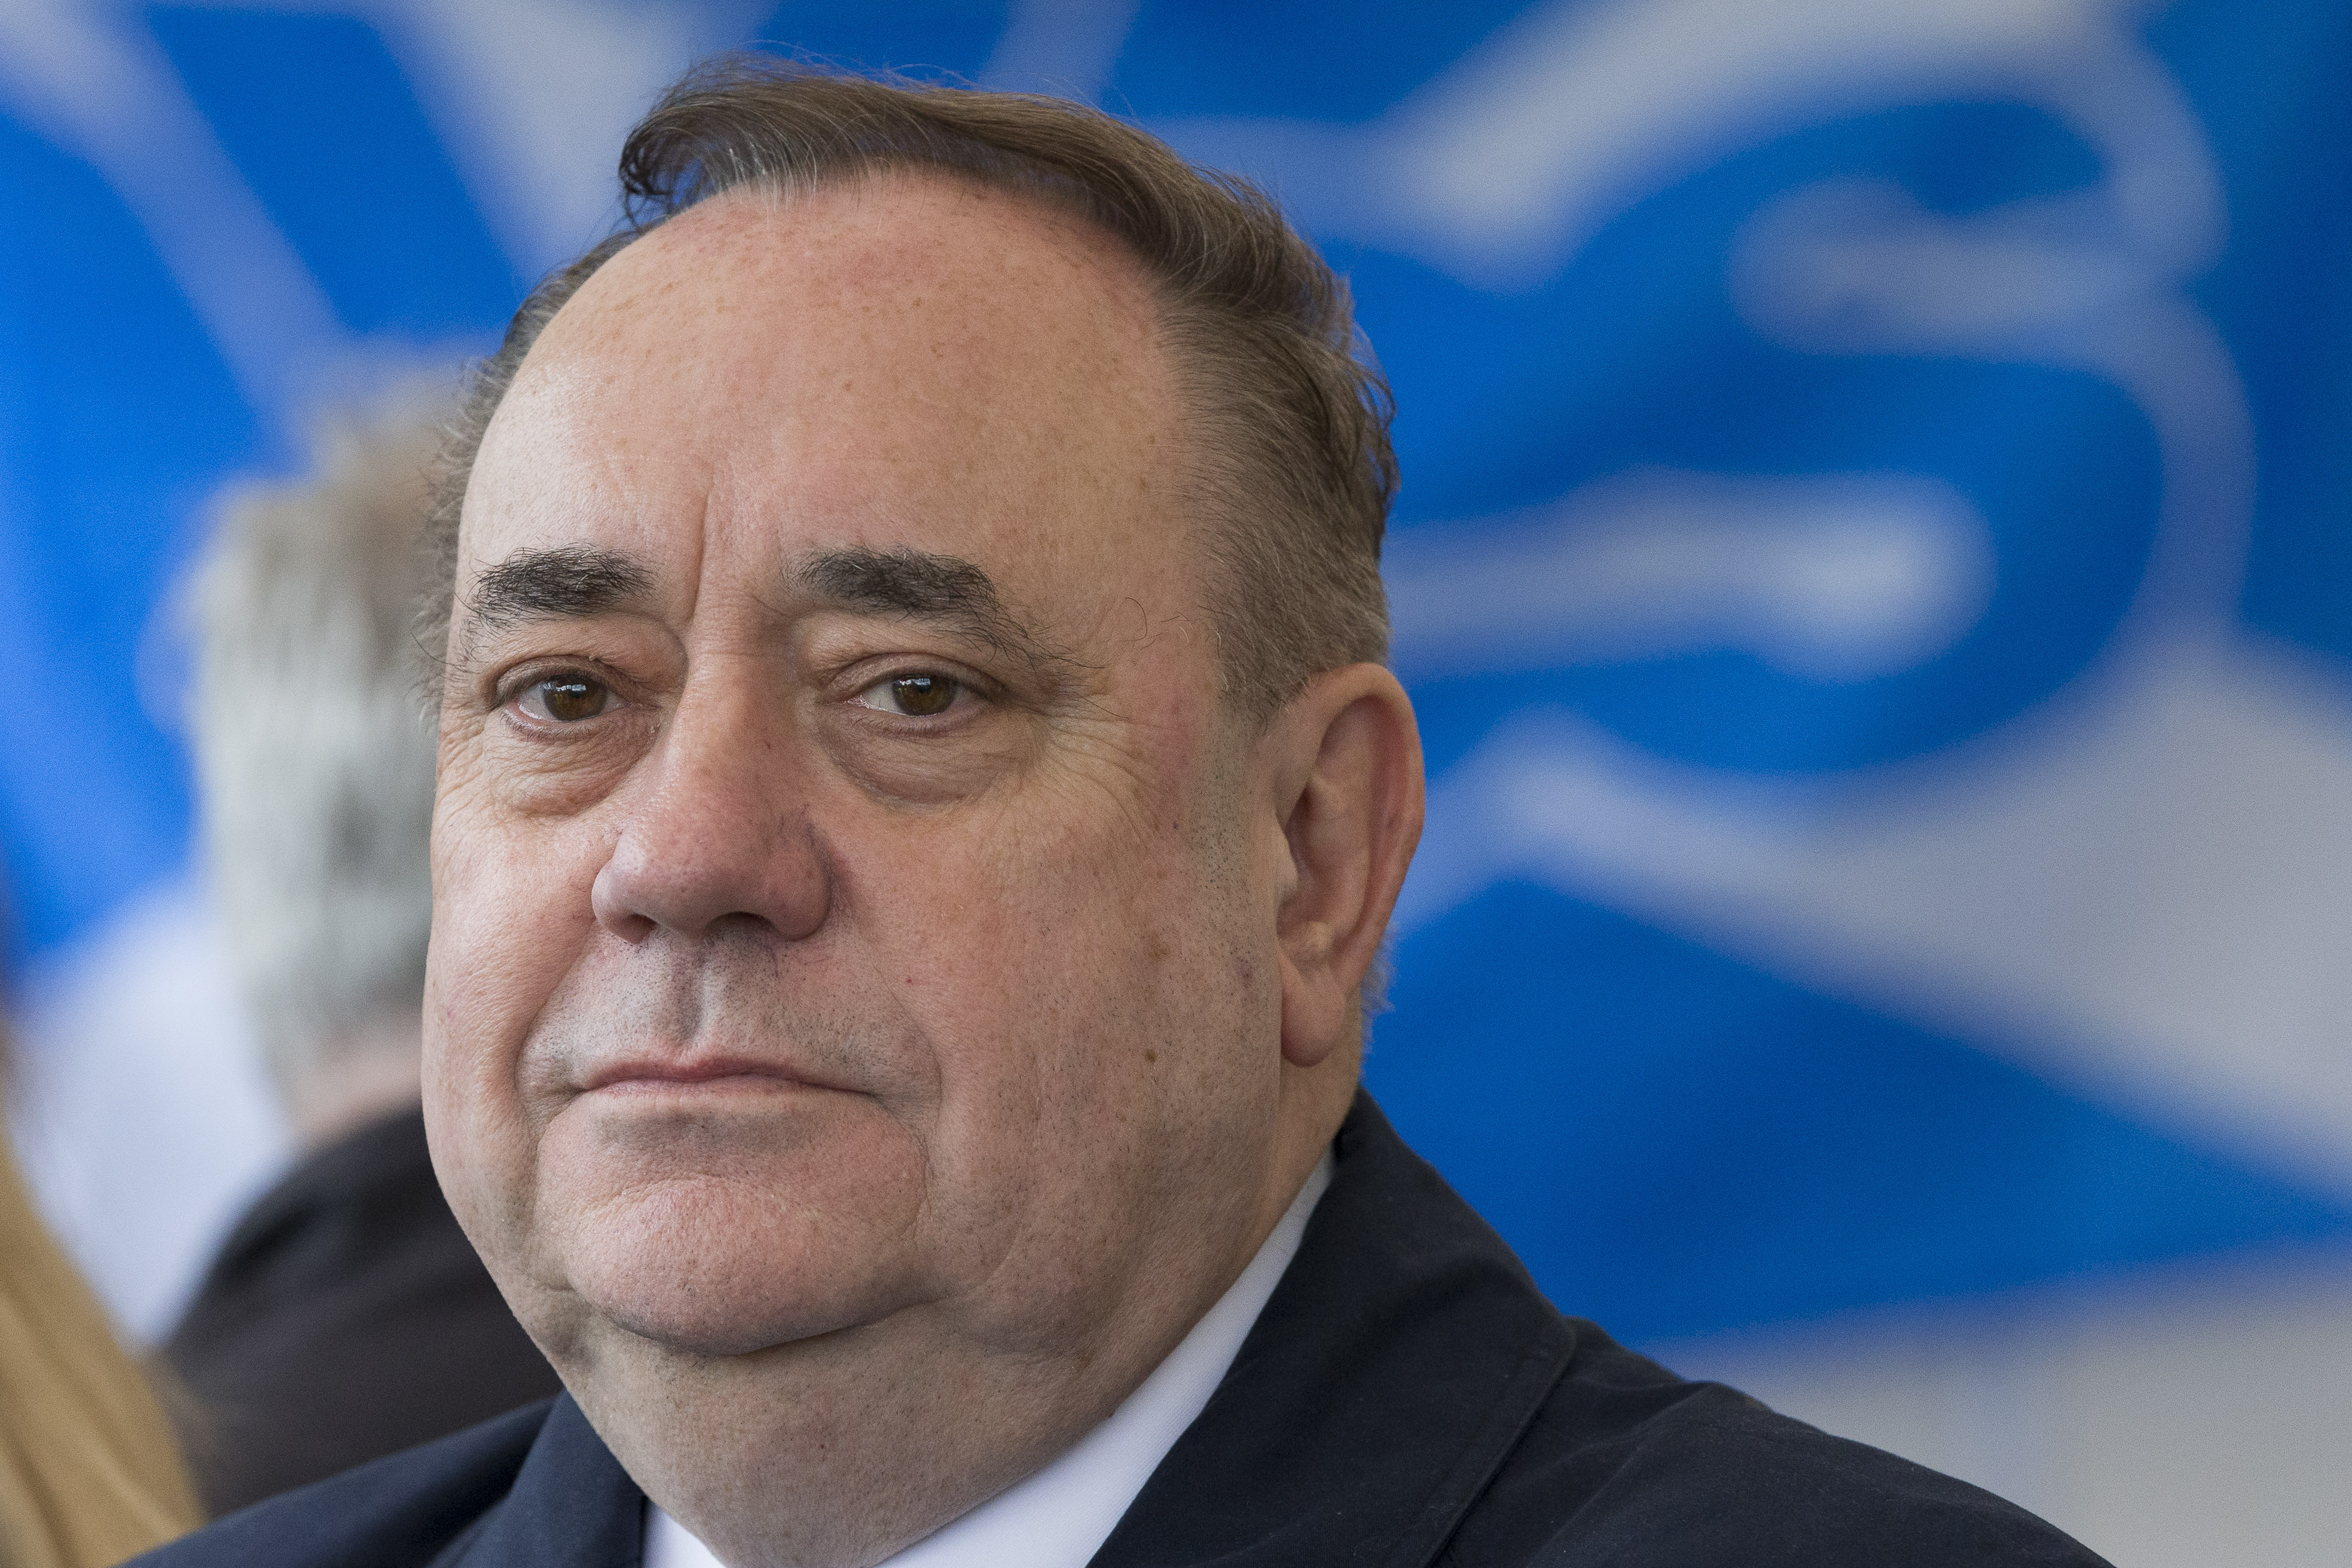 Alex Salmond said Tony Blair did not tell the Scottish Government about a deal he made with the Libyan government.